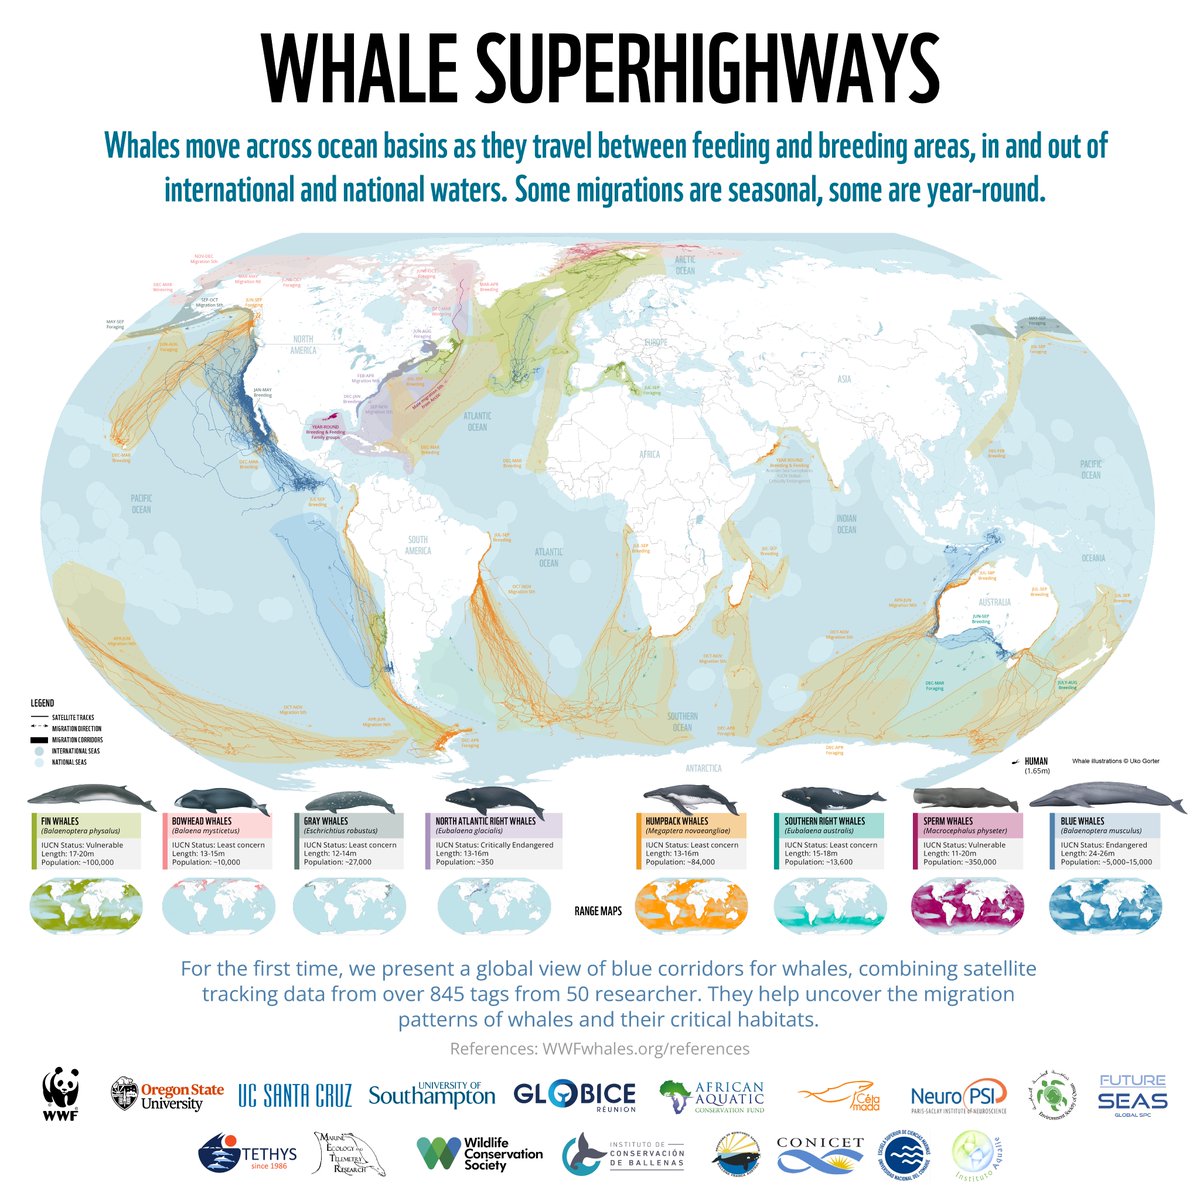 1.5 years in the making

A mega-collaboration between #whale #science & #conservation @WWF @OregonState @ucsc @unisouthampton 

>50 researchers inc/@TethysResearch @TheWCS @ICB_Argentina @MarEcoTel @eso_oman_  & more

New #ProtectingBlueCorridors report 
wwfwhales.org/news-stories/p…